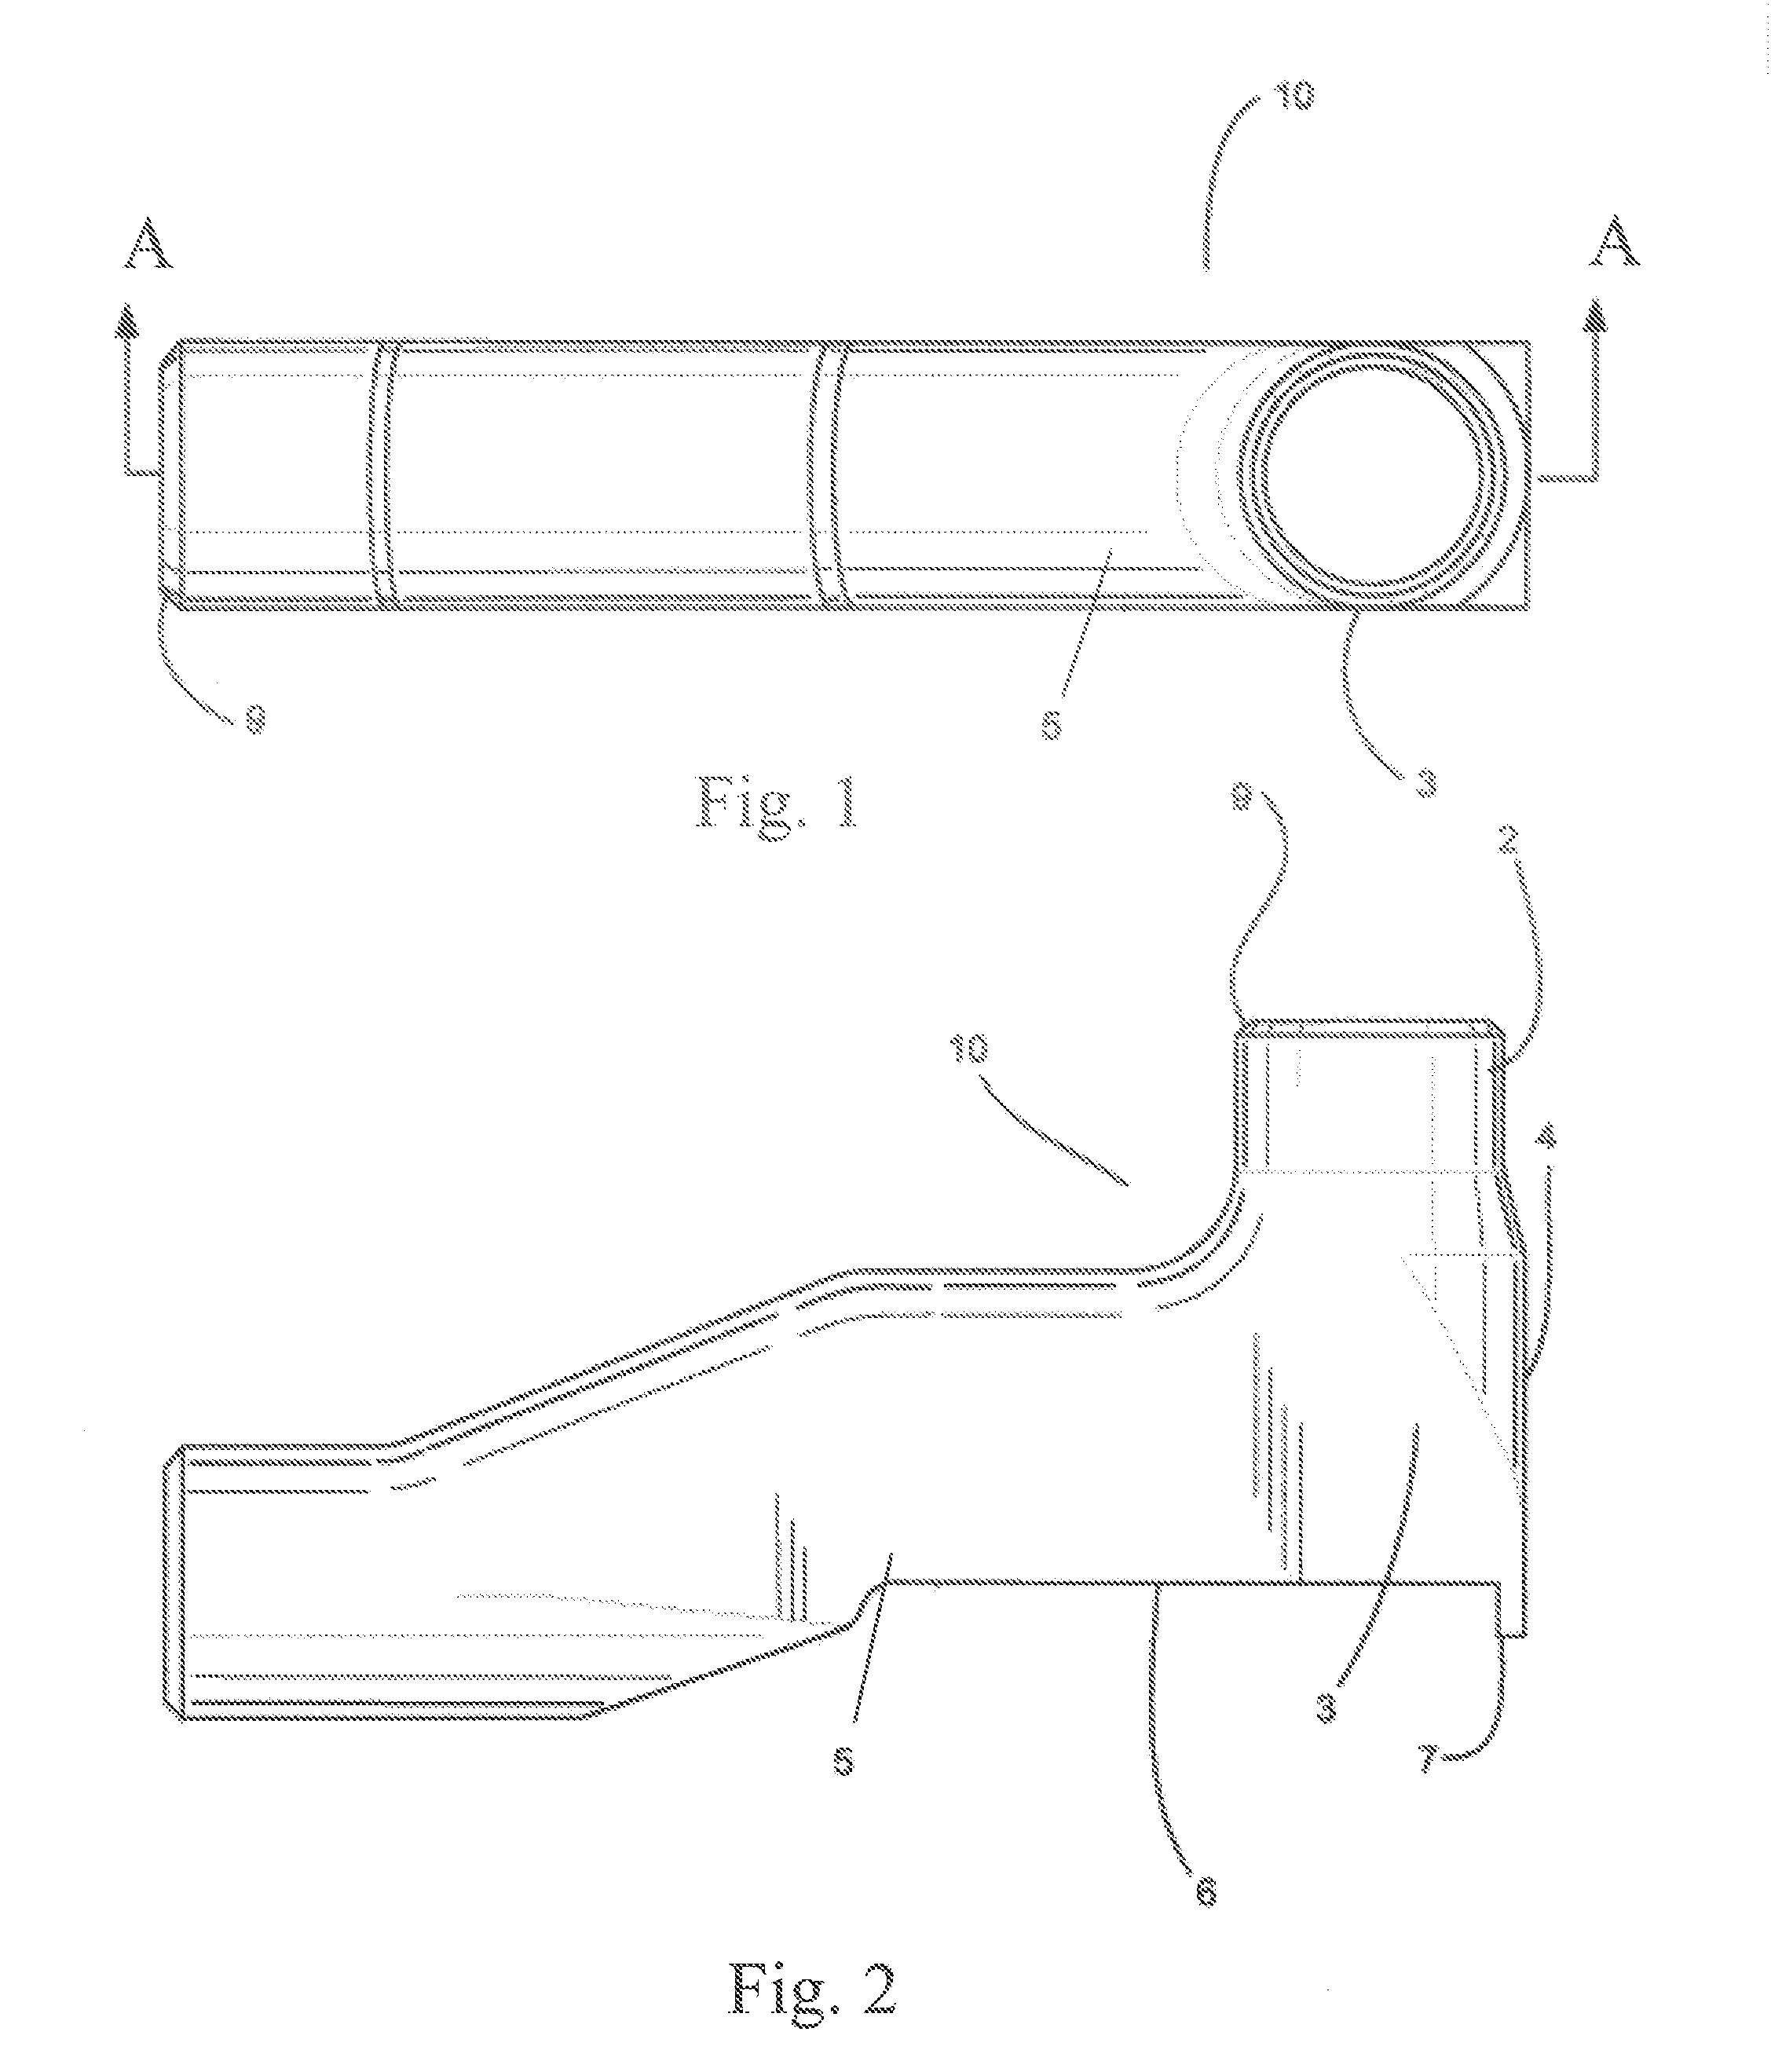 End Support Configuration for Steam Tubes of a Superheater or Reheater